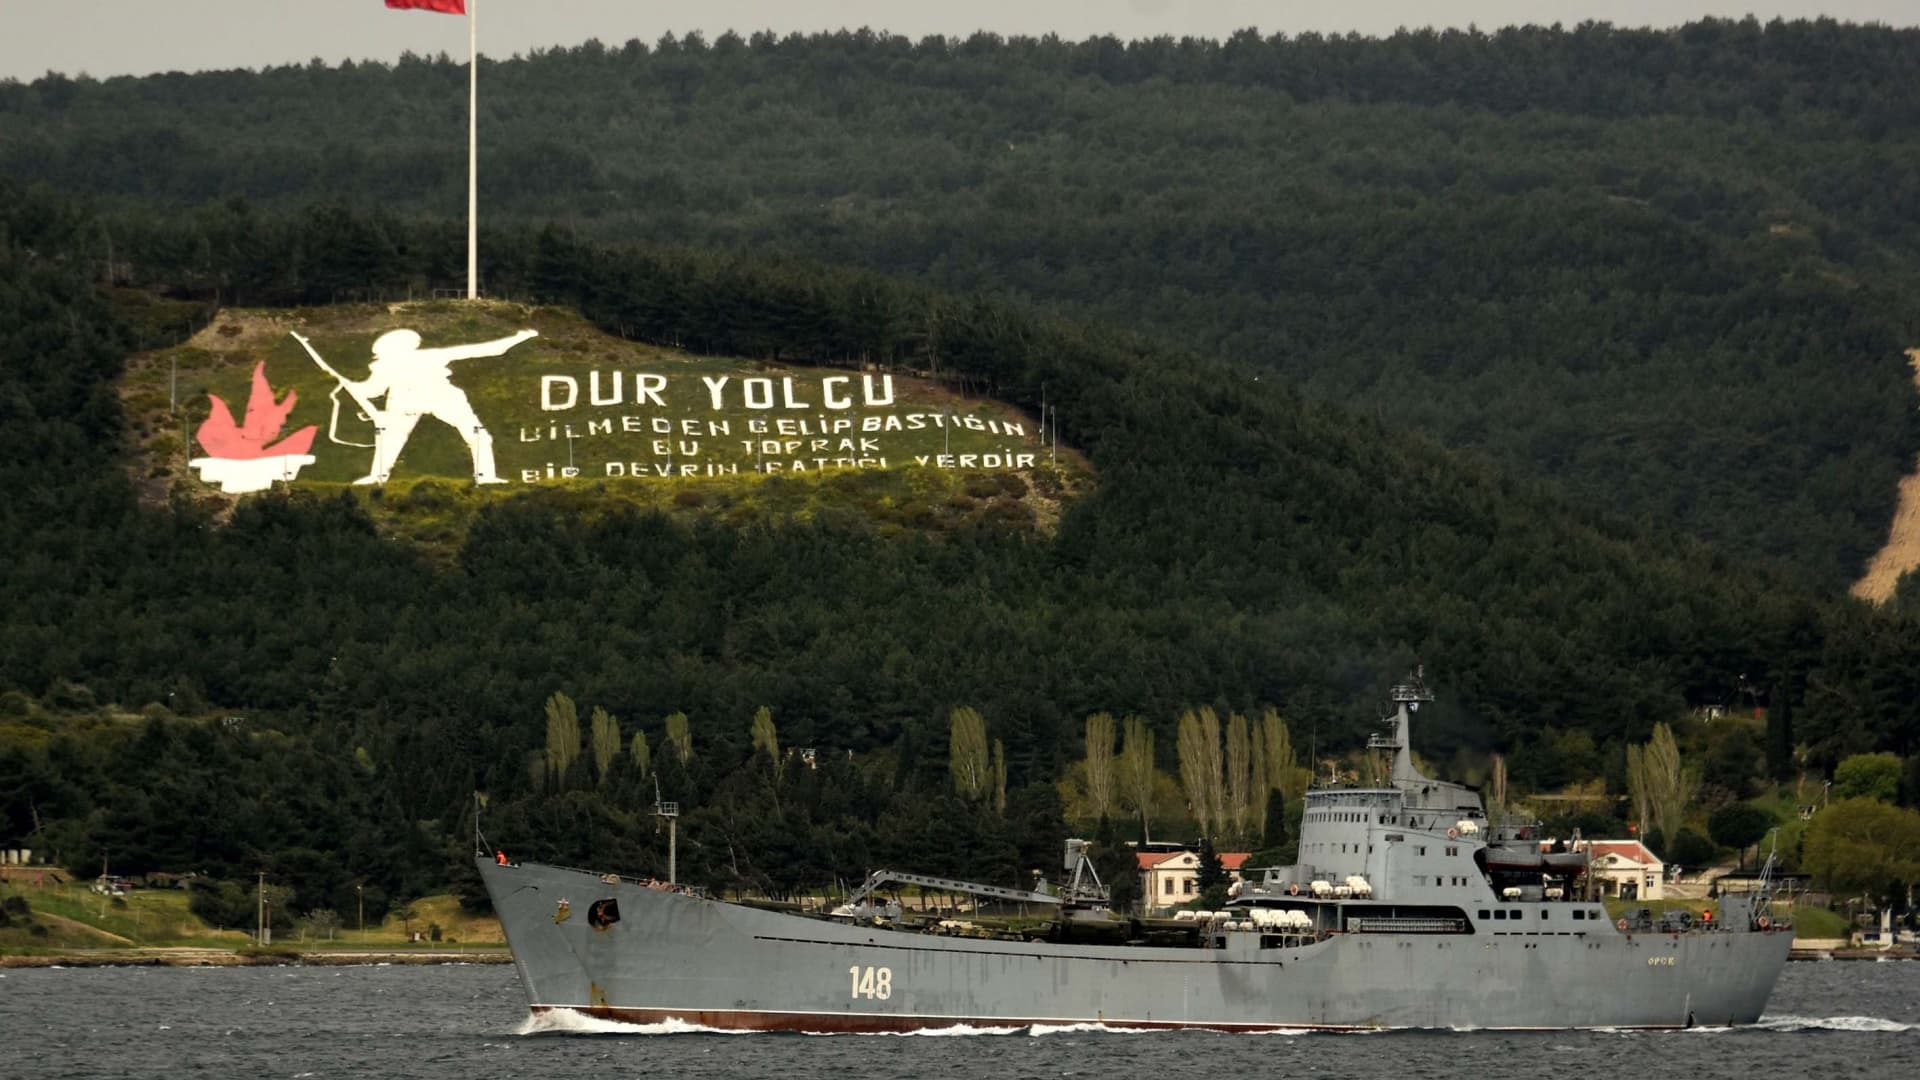 In this image from 2018, the Russian warship Orsk passes through Turkey's Dardanelles Strait. Military vehicles and a large hoist are visible on deck.